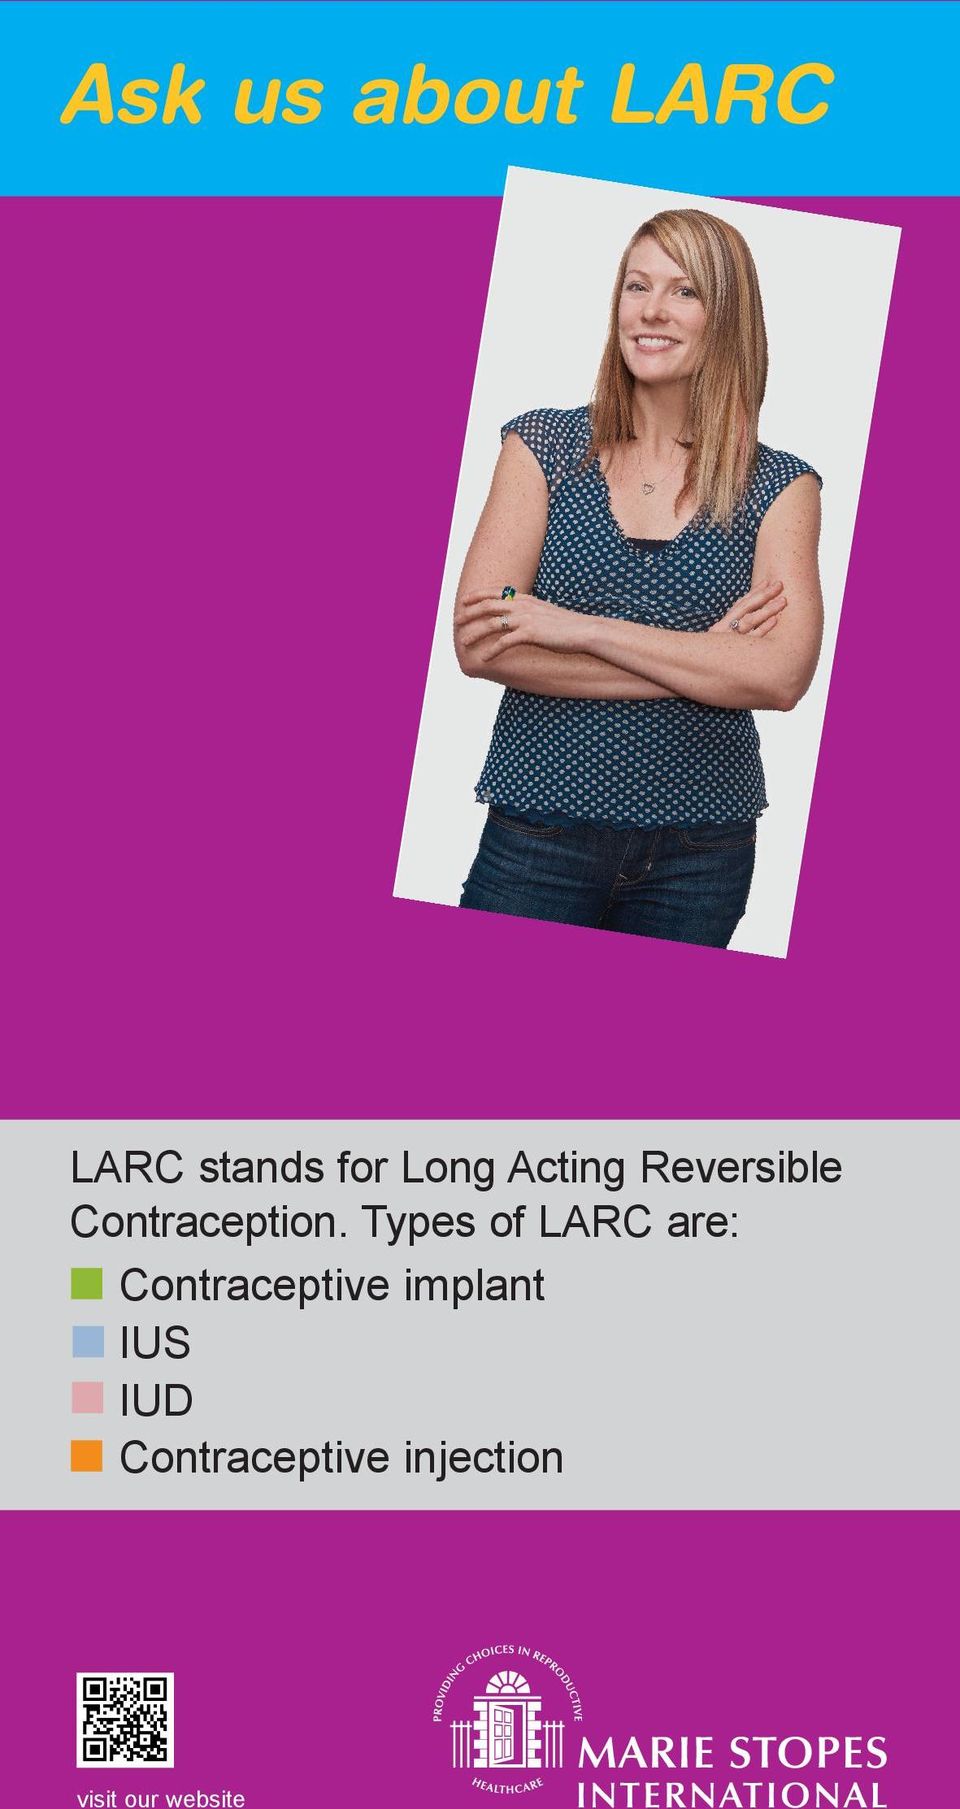 Types of LARC are: Contraceptive implant